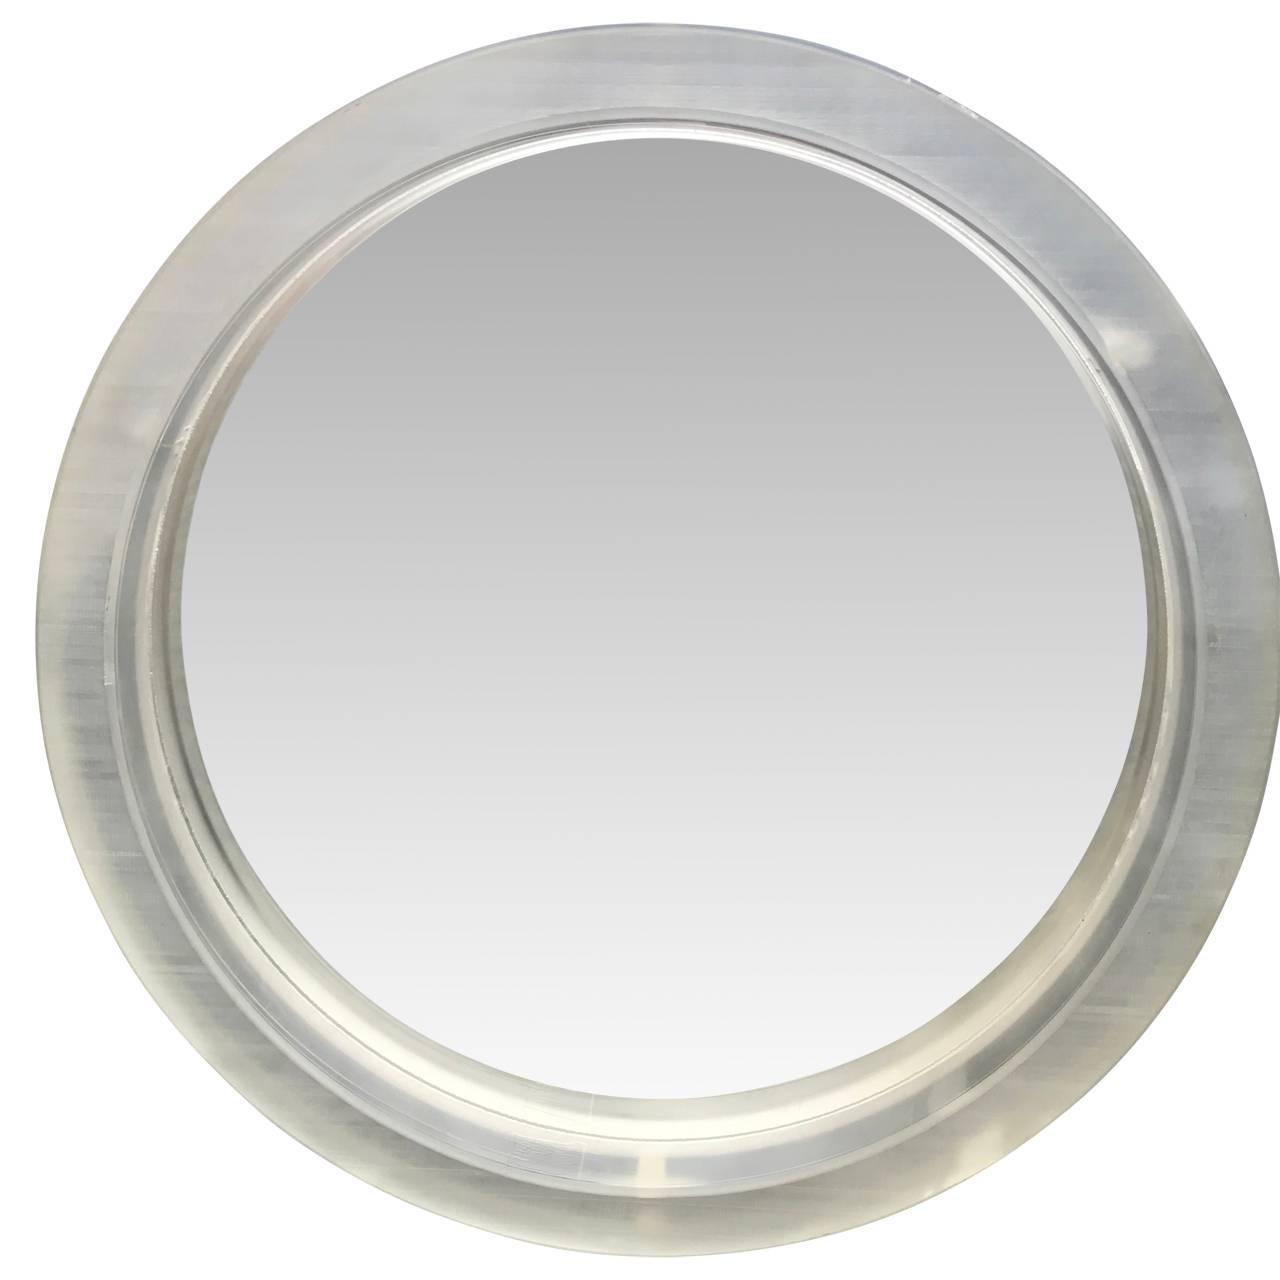 3 inch thick circular rough-cut mirrors.
A single thick framed acrylic or Lucite mirror. The surface on the mirror is rough and individual, due their handcrafted cut. The mirror can be lit from behind in white or a combination of colors. Please see